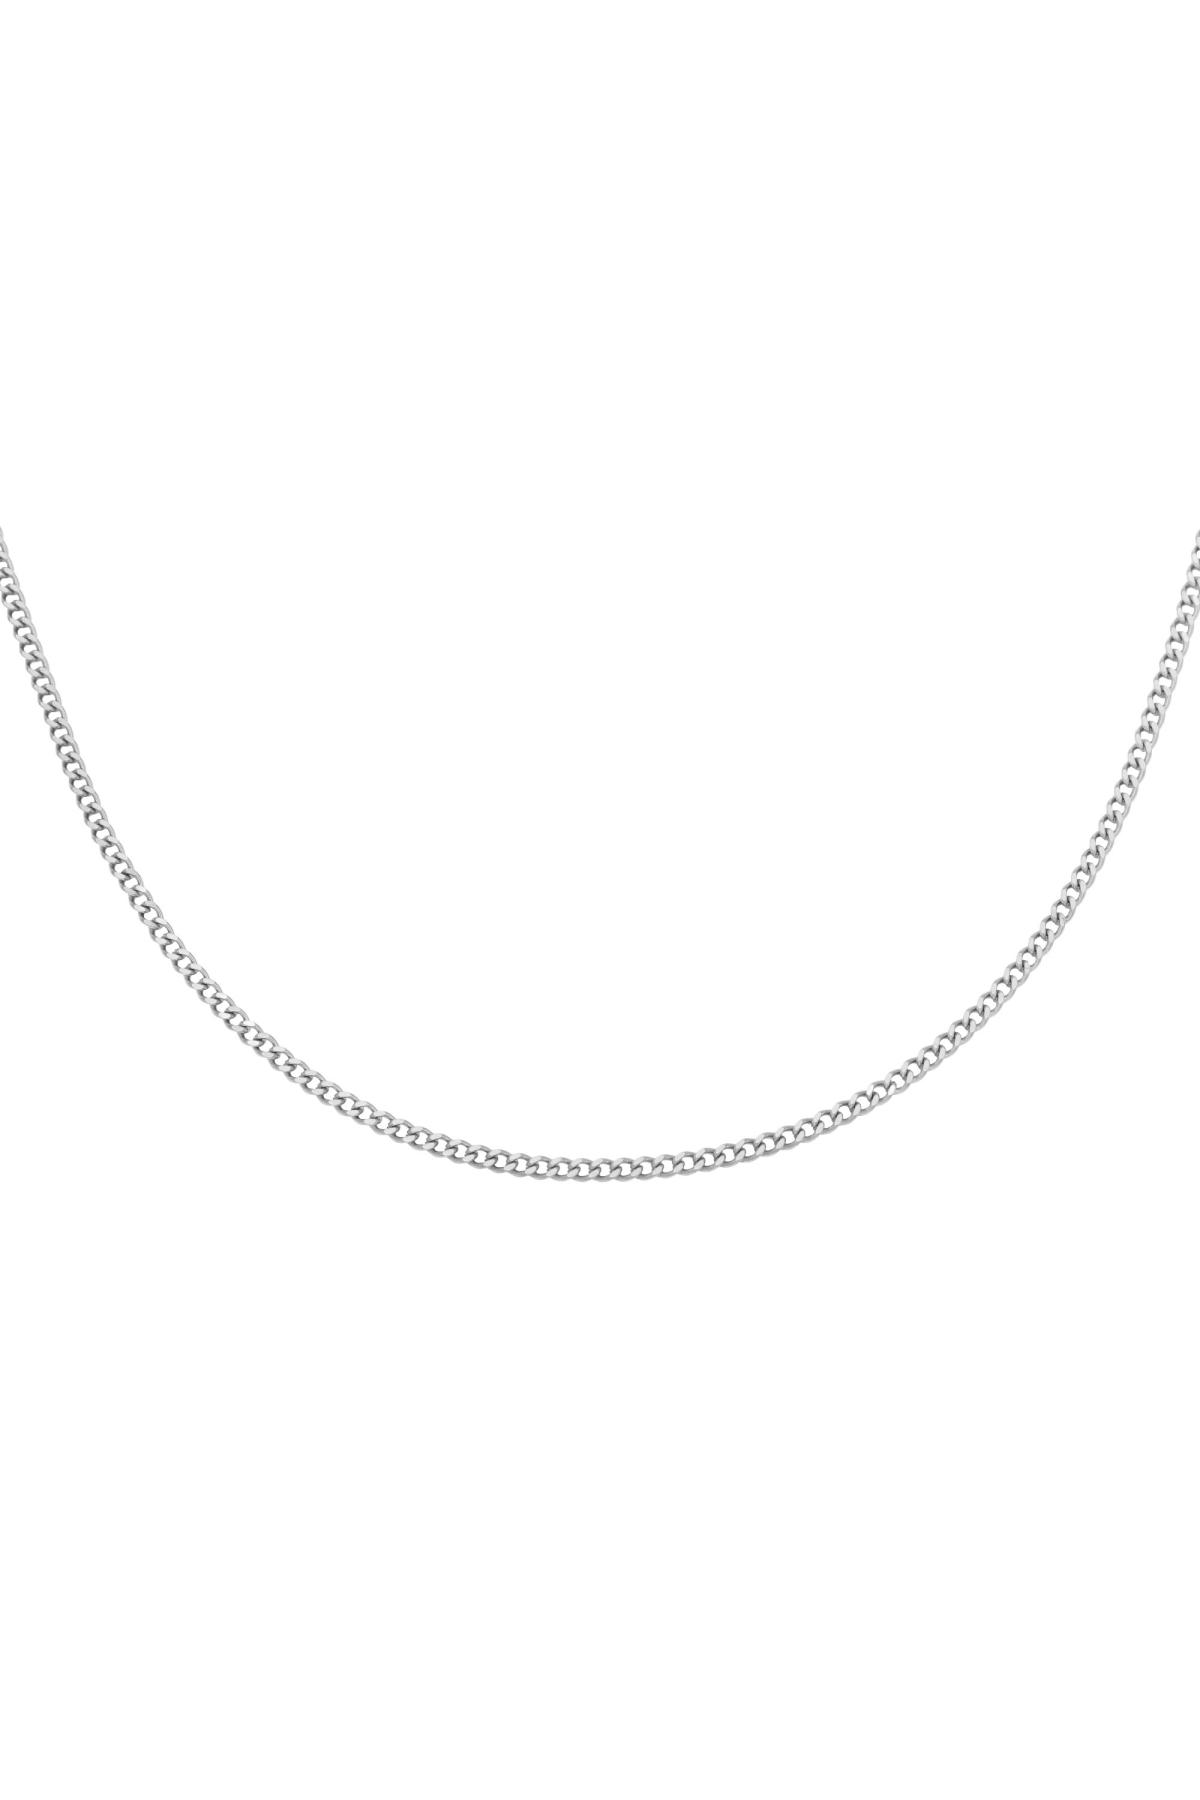 Necklace Tiny Plain Chains Silver Stainless Steel